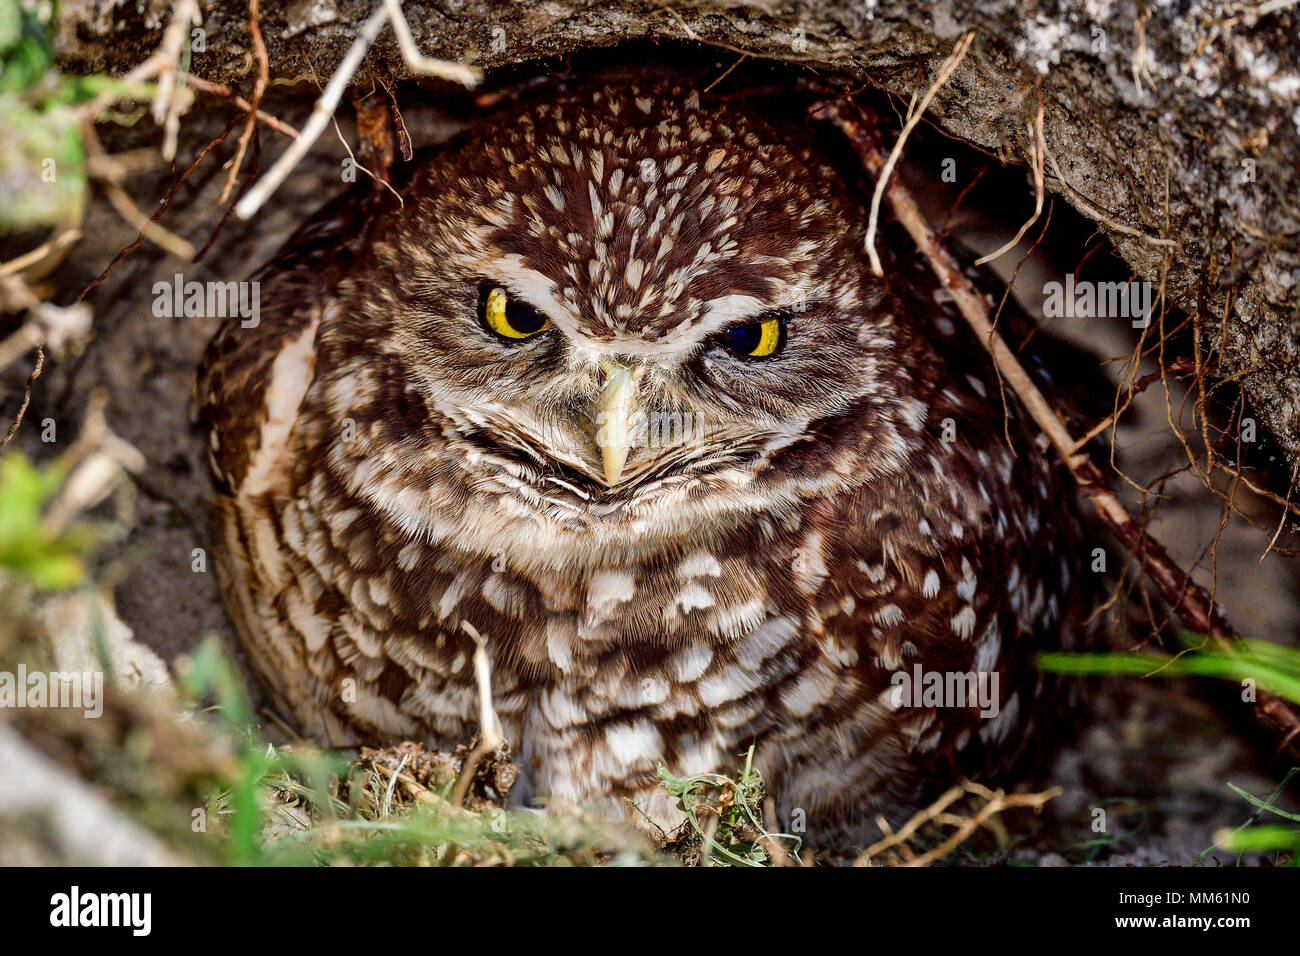 Burrowing owl looking mean while guarding the nest tunnel entrance. Stock Photo